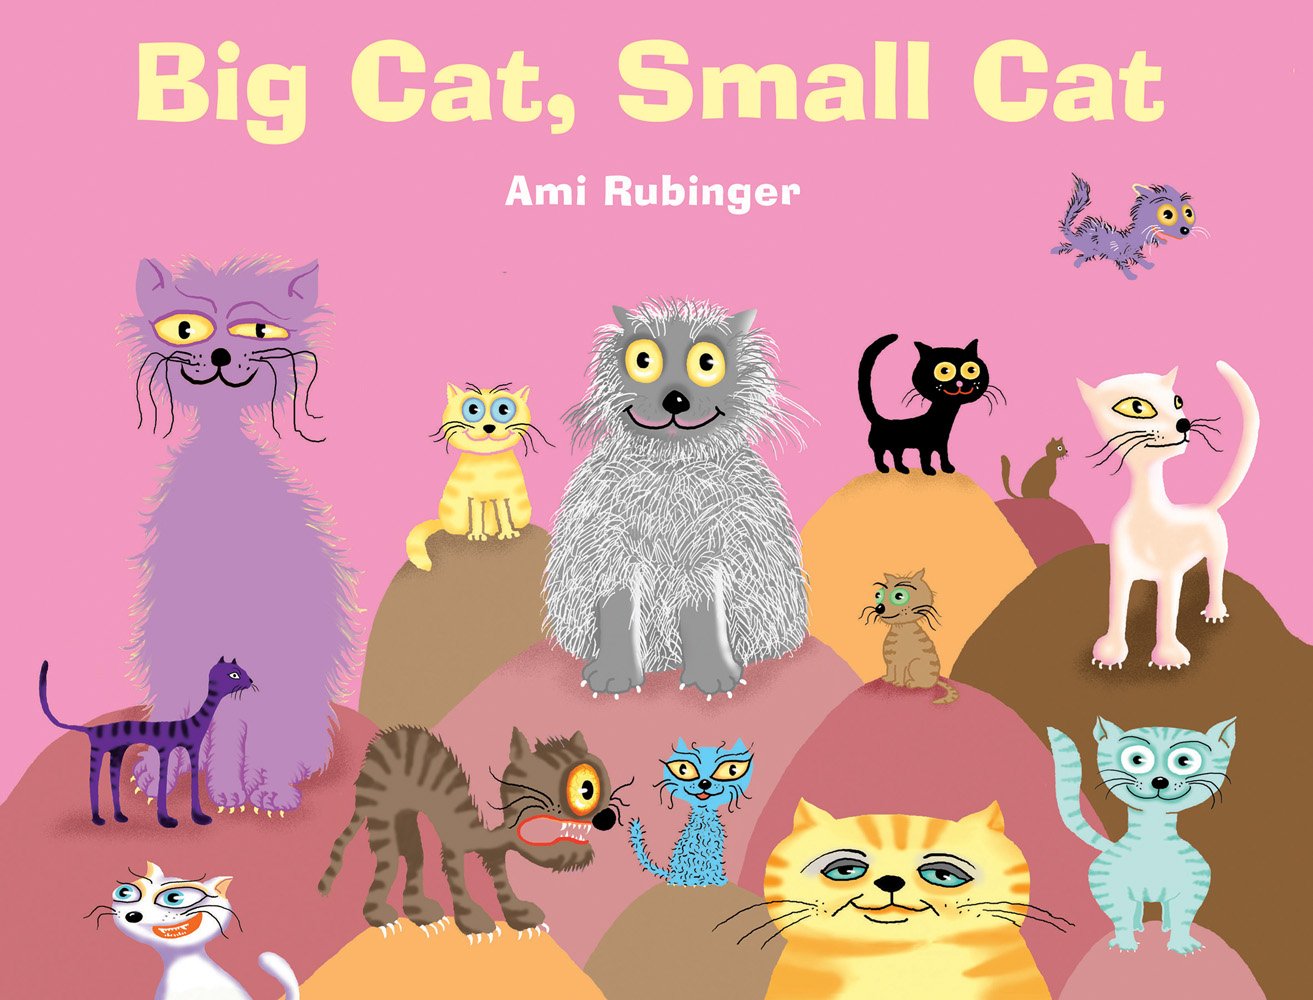 Illustrations of various coloured cats sitting on pink and brown mounds, Big Cat, Small Cat in pale yellow font above.